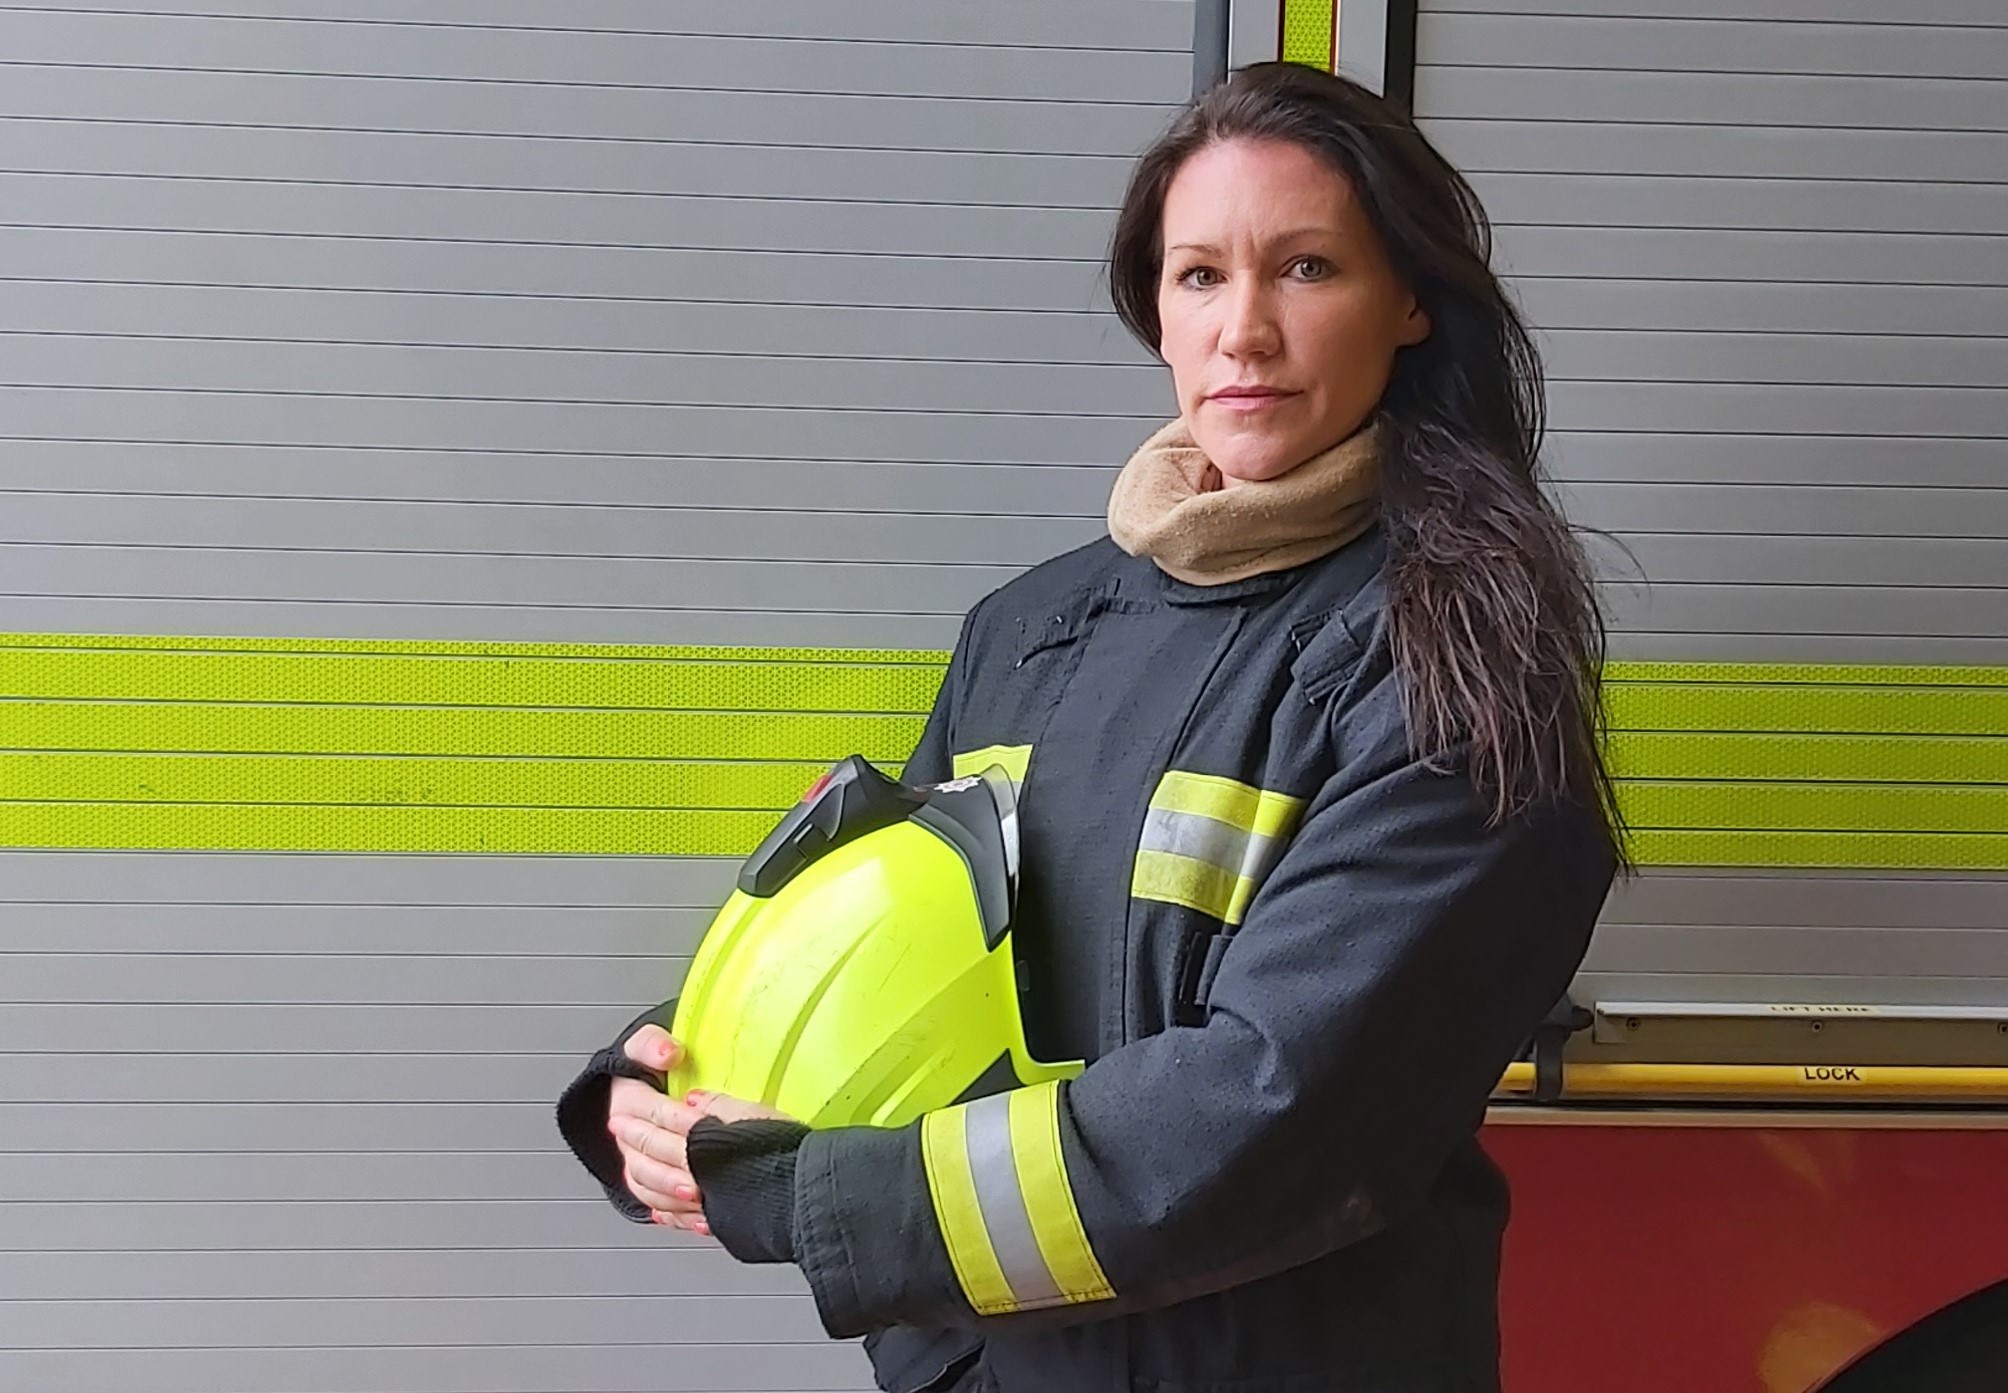 A close-up of firefighter Laura stood in her kit holding her helmet.